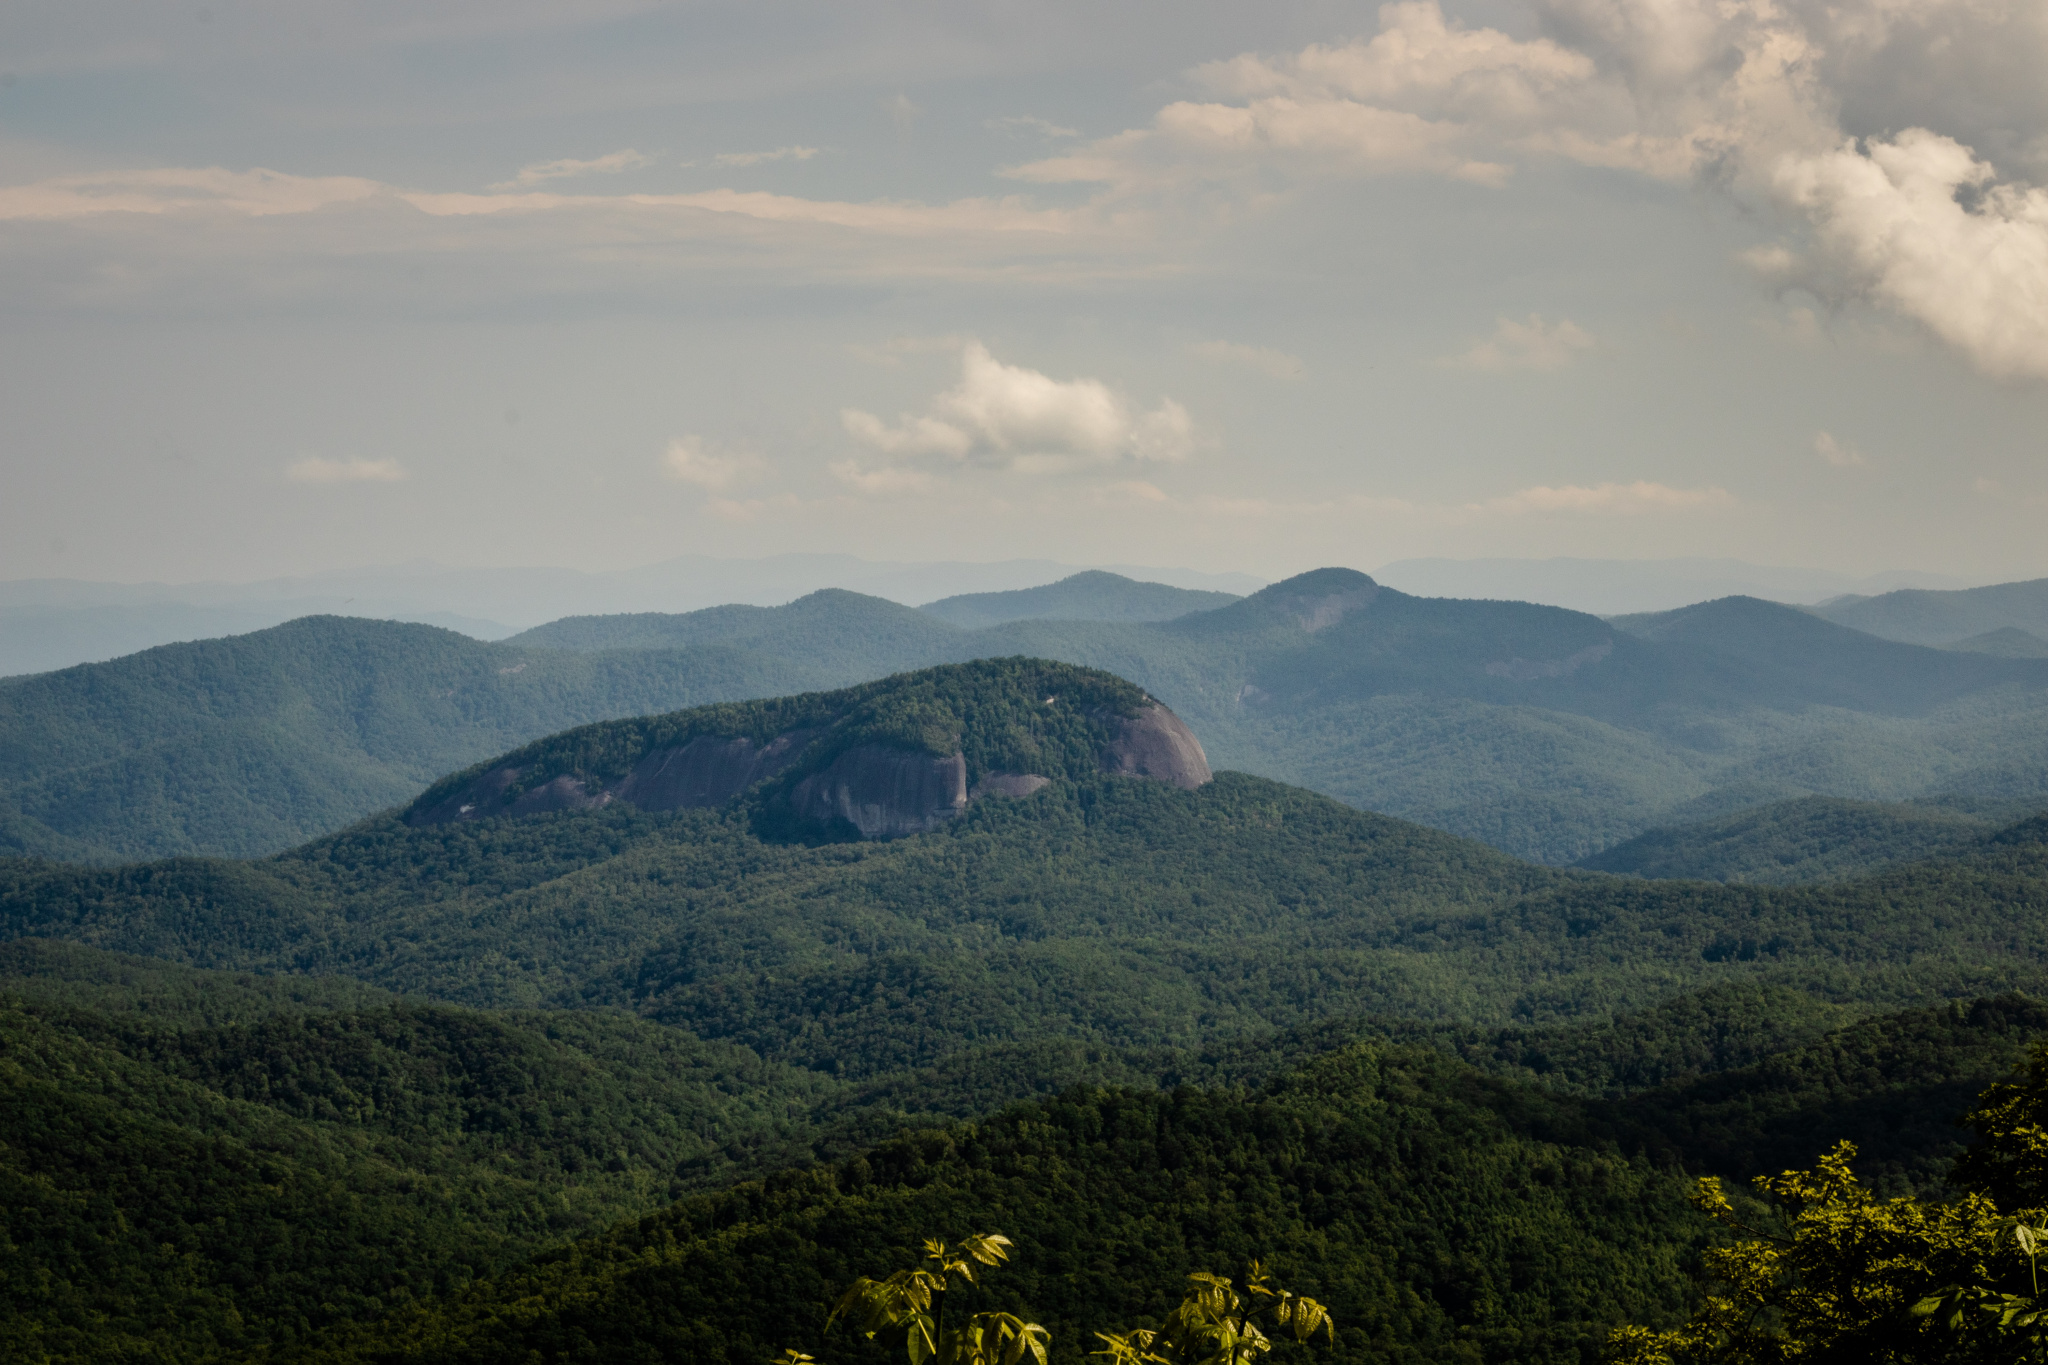 View of Looking Glass Rock from the Blue Ridge Parkway